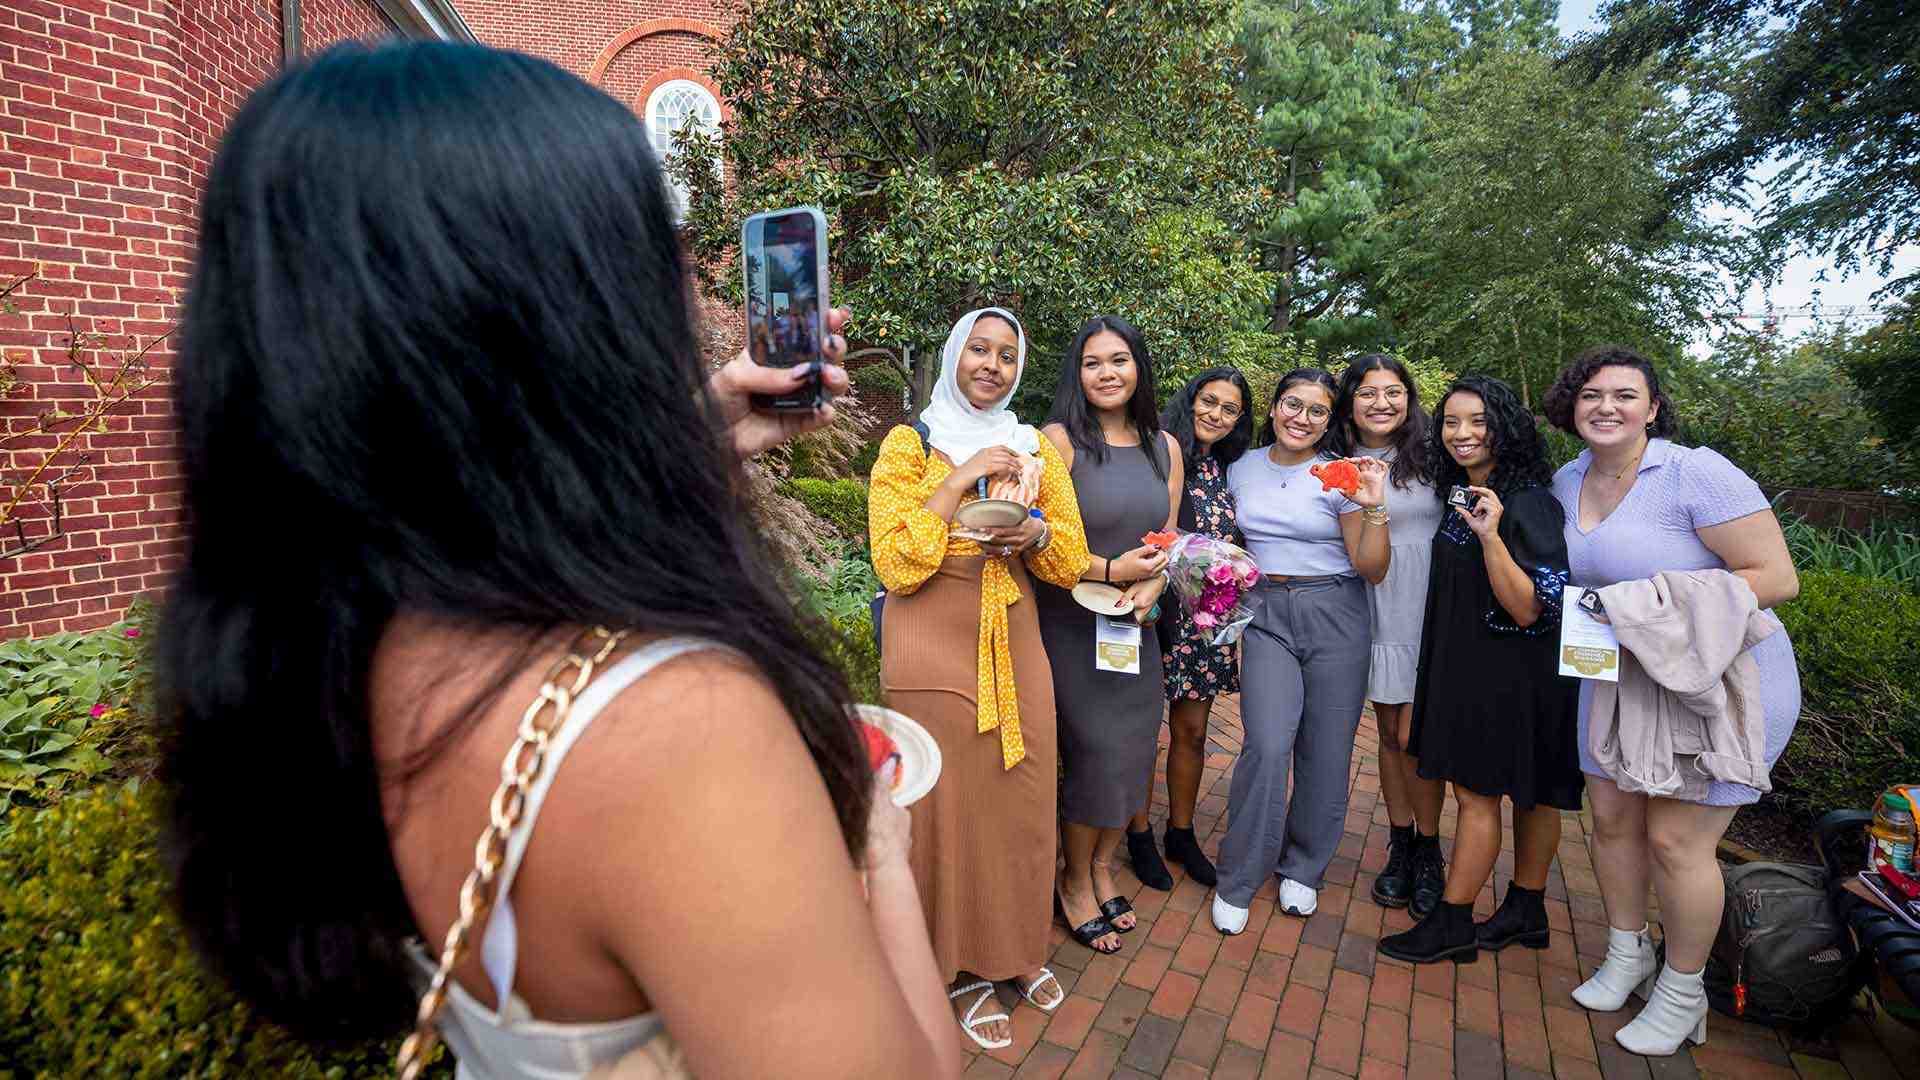 Student takes a photo of group of students smiling outdoors